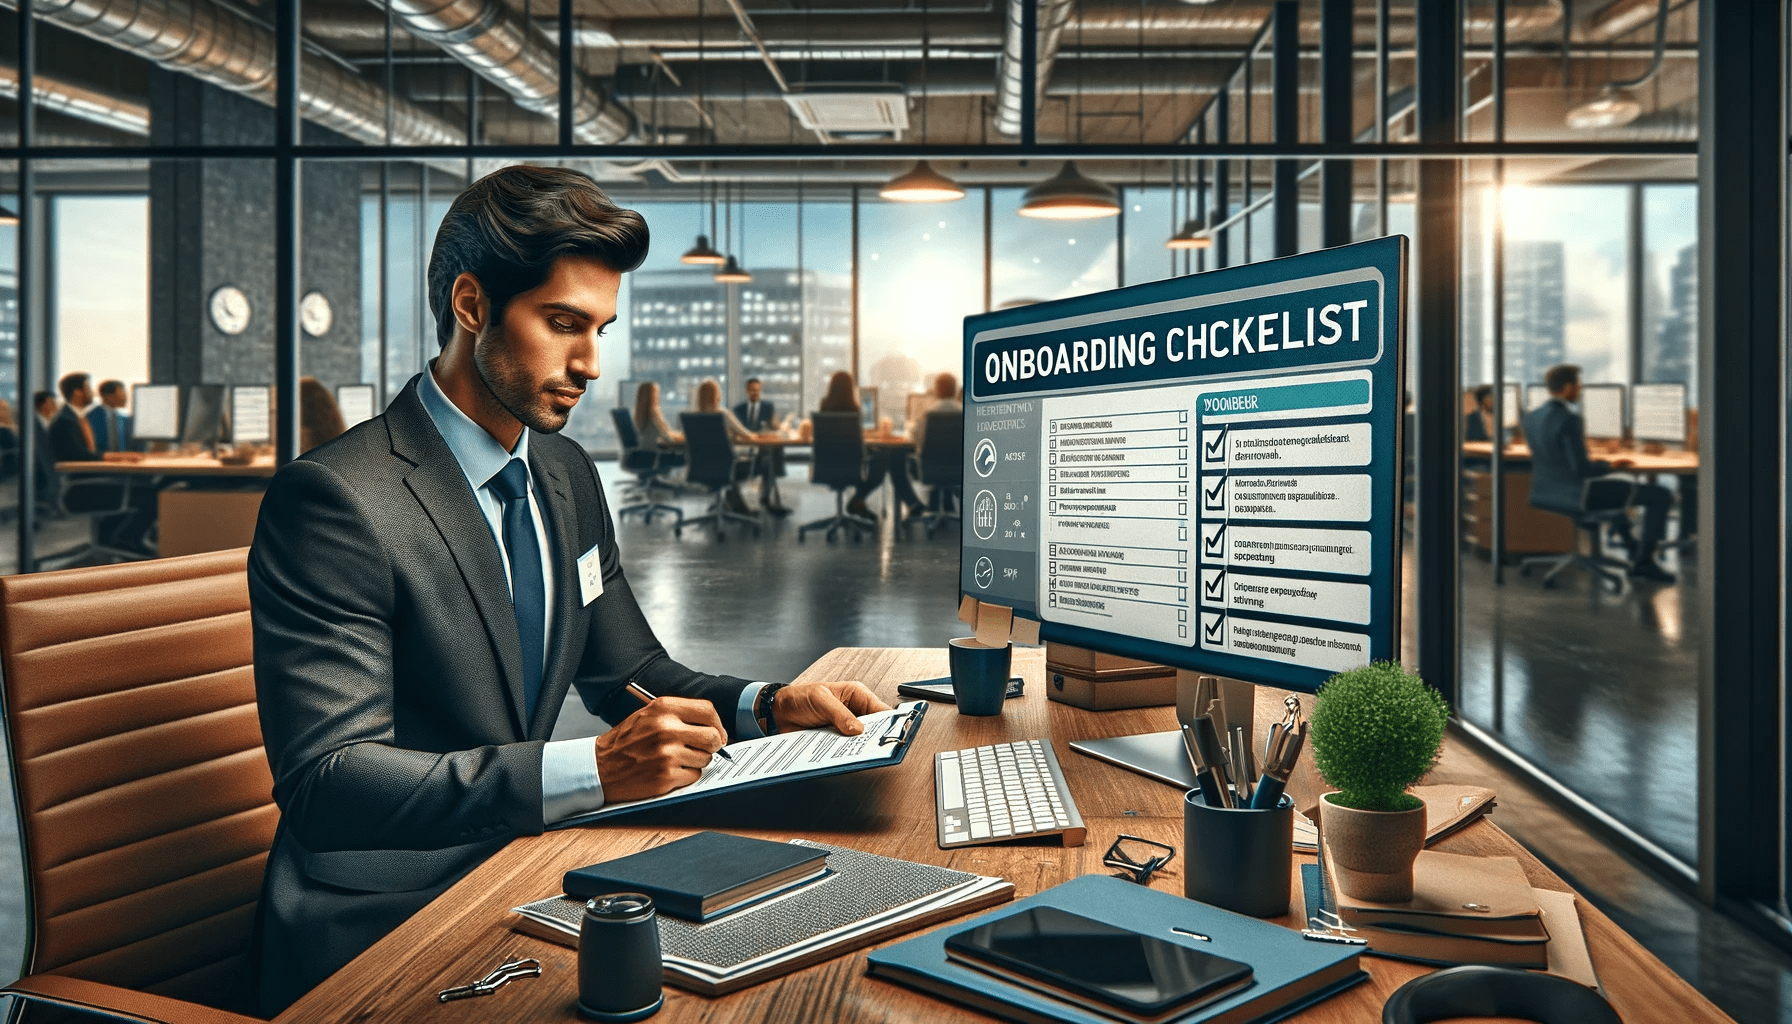 An image depicting hr professionals with an onboarding checklist during the onboarding process